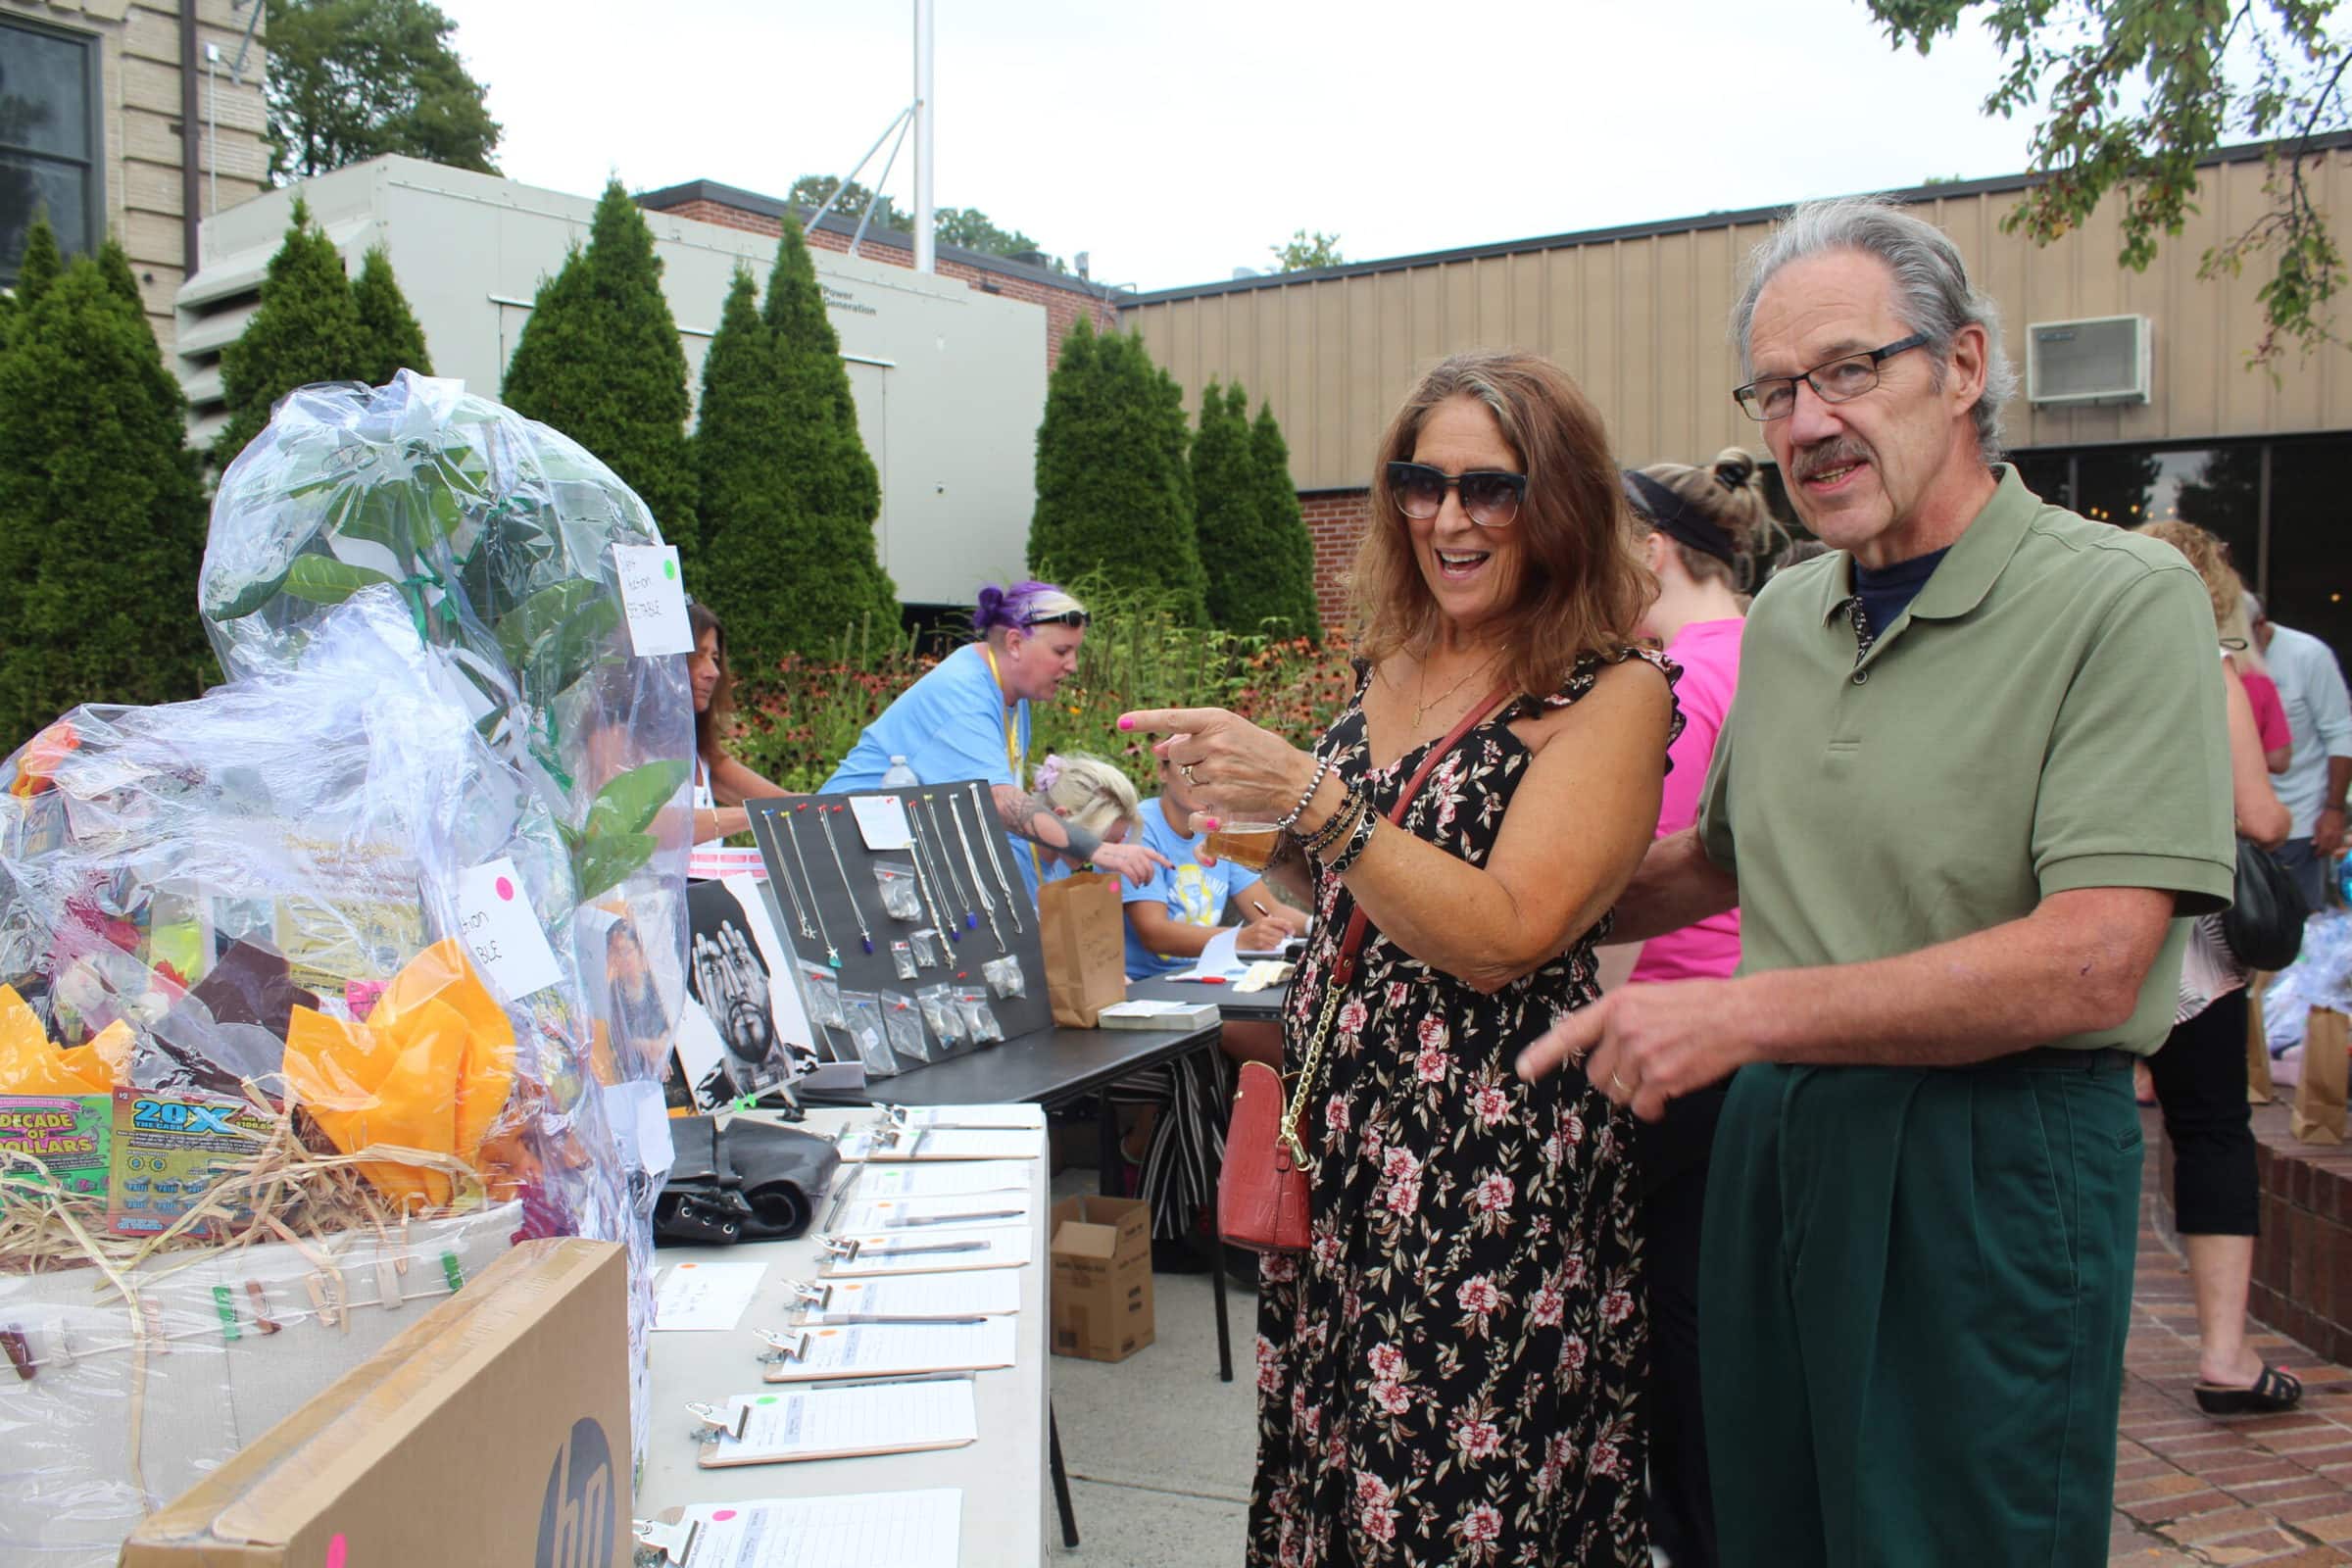 Ralph and Janet Belmore check out the raffle items.